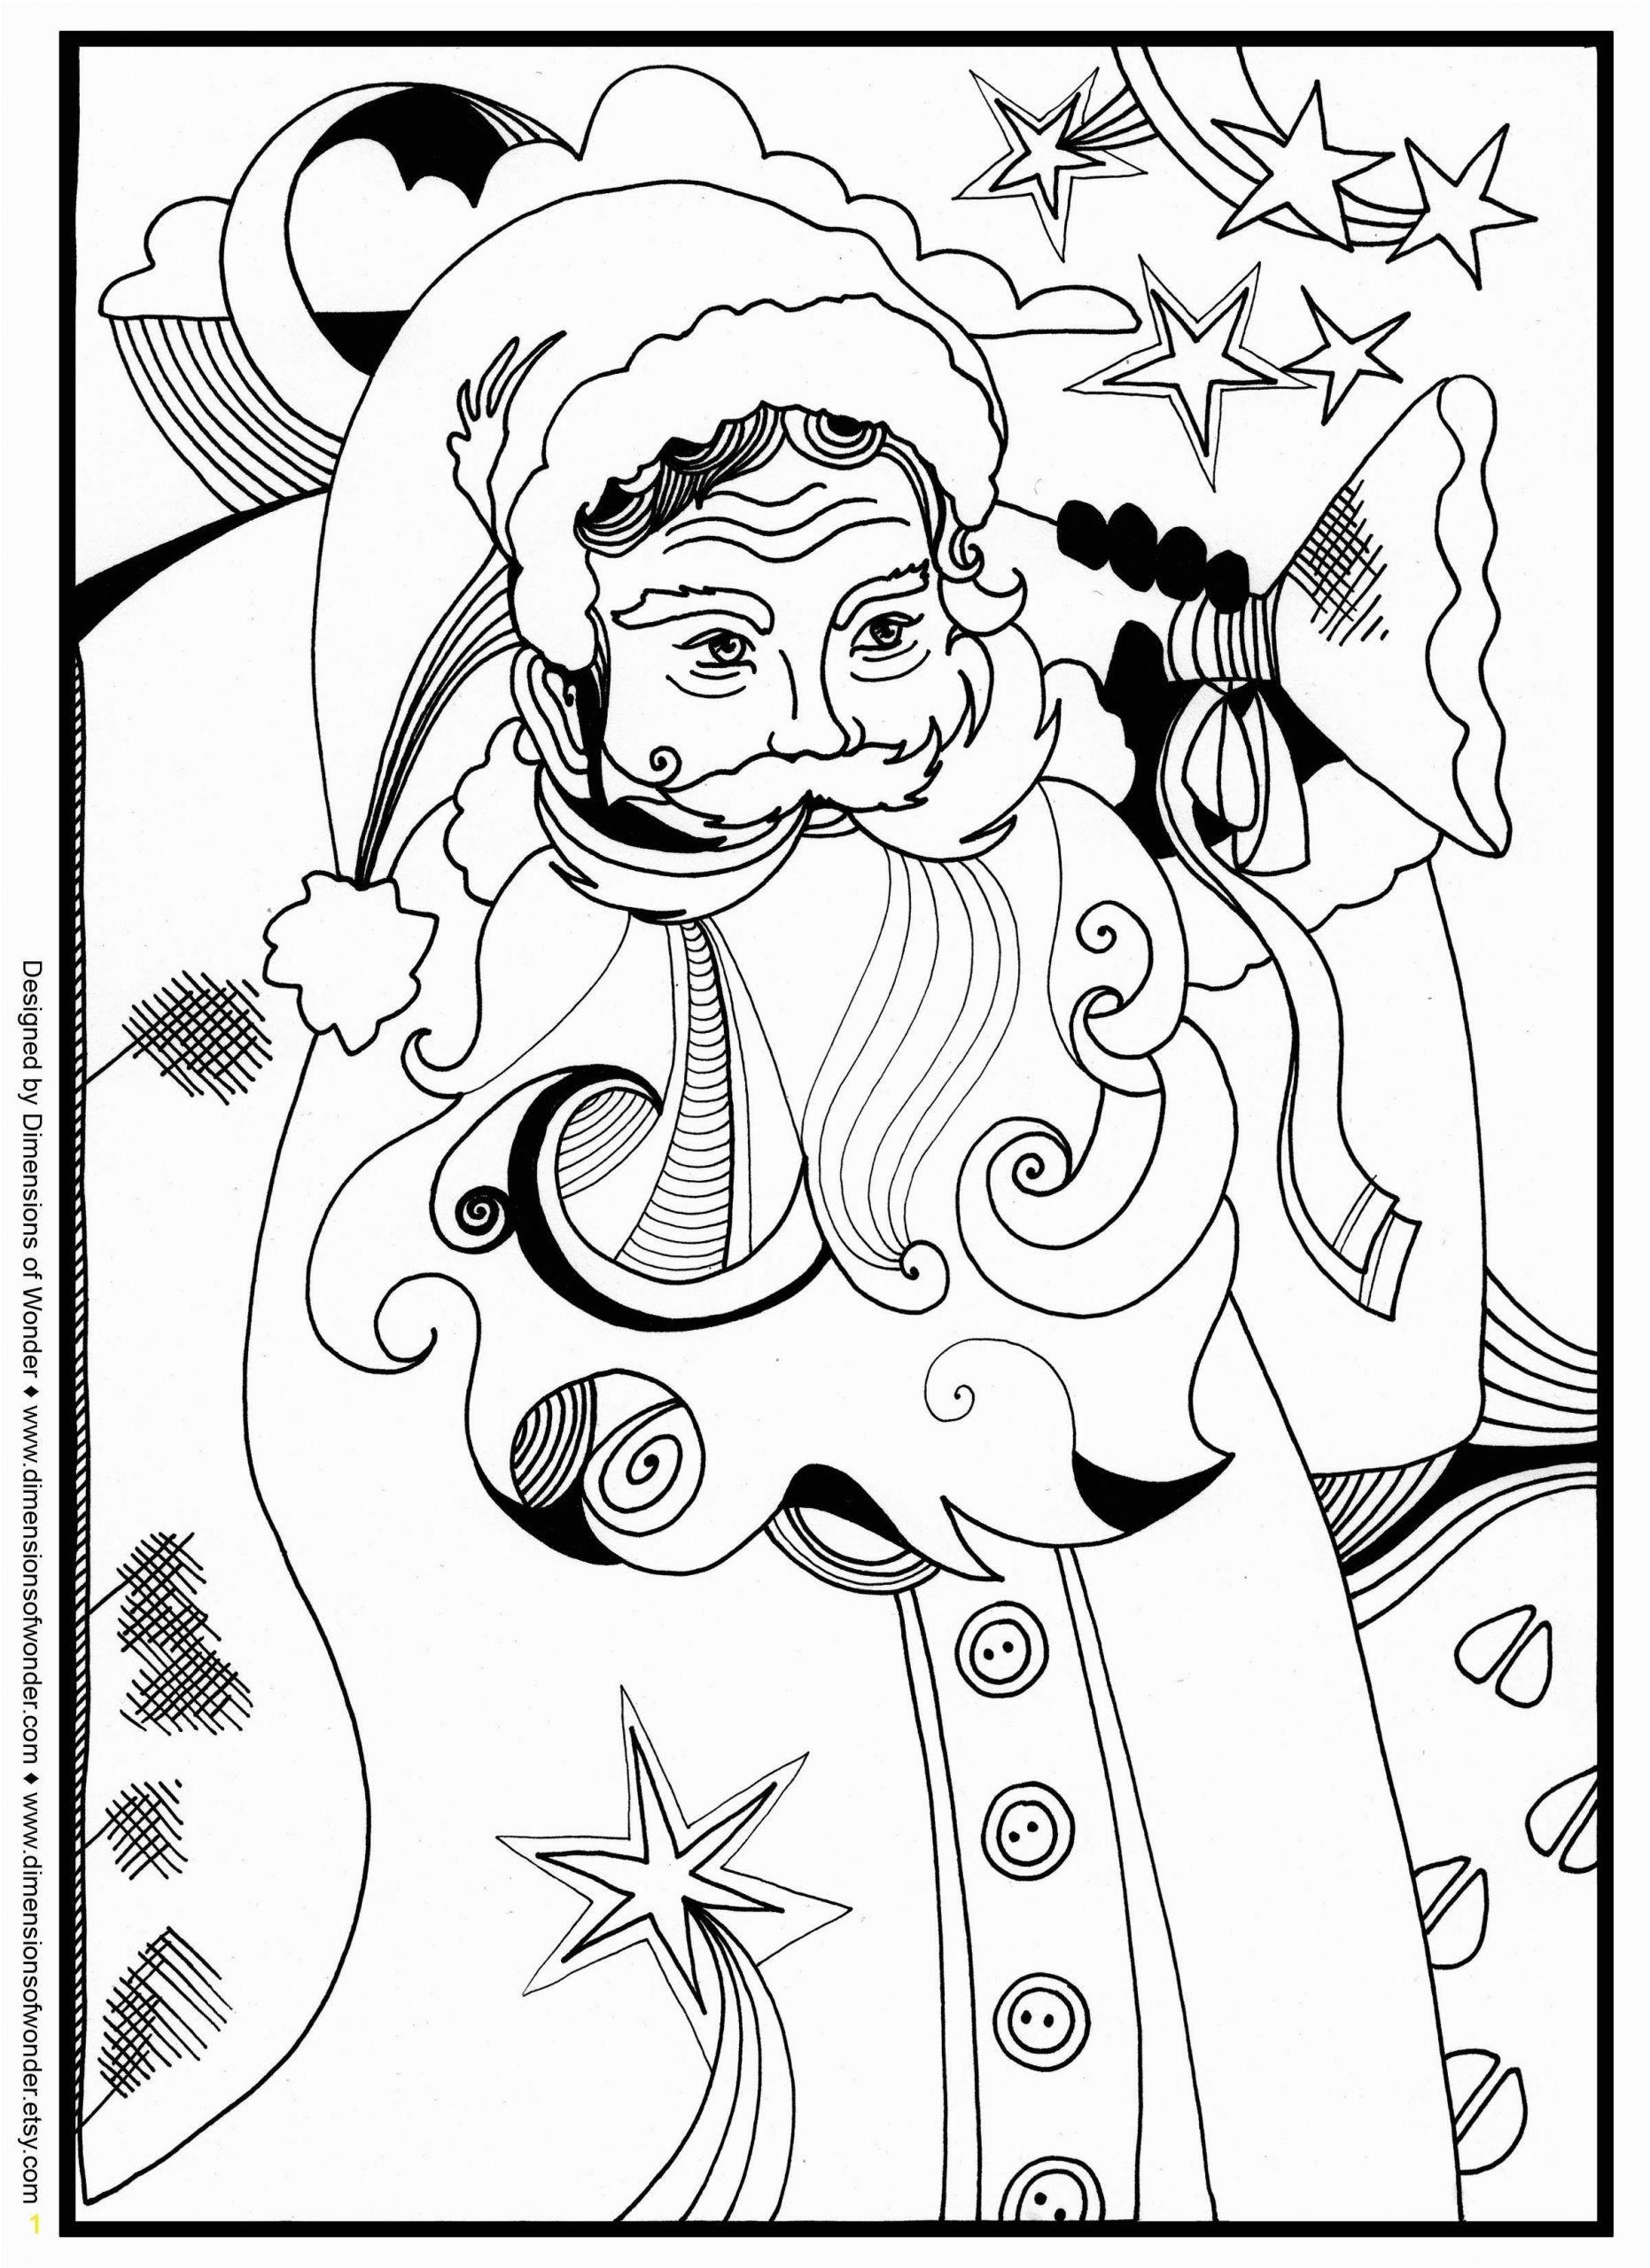 Free Santa Coloring Pages Printable Santa Around the World Coloring Pages